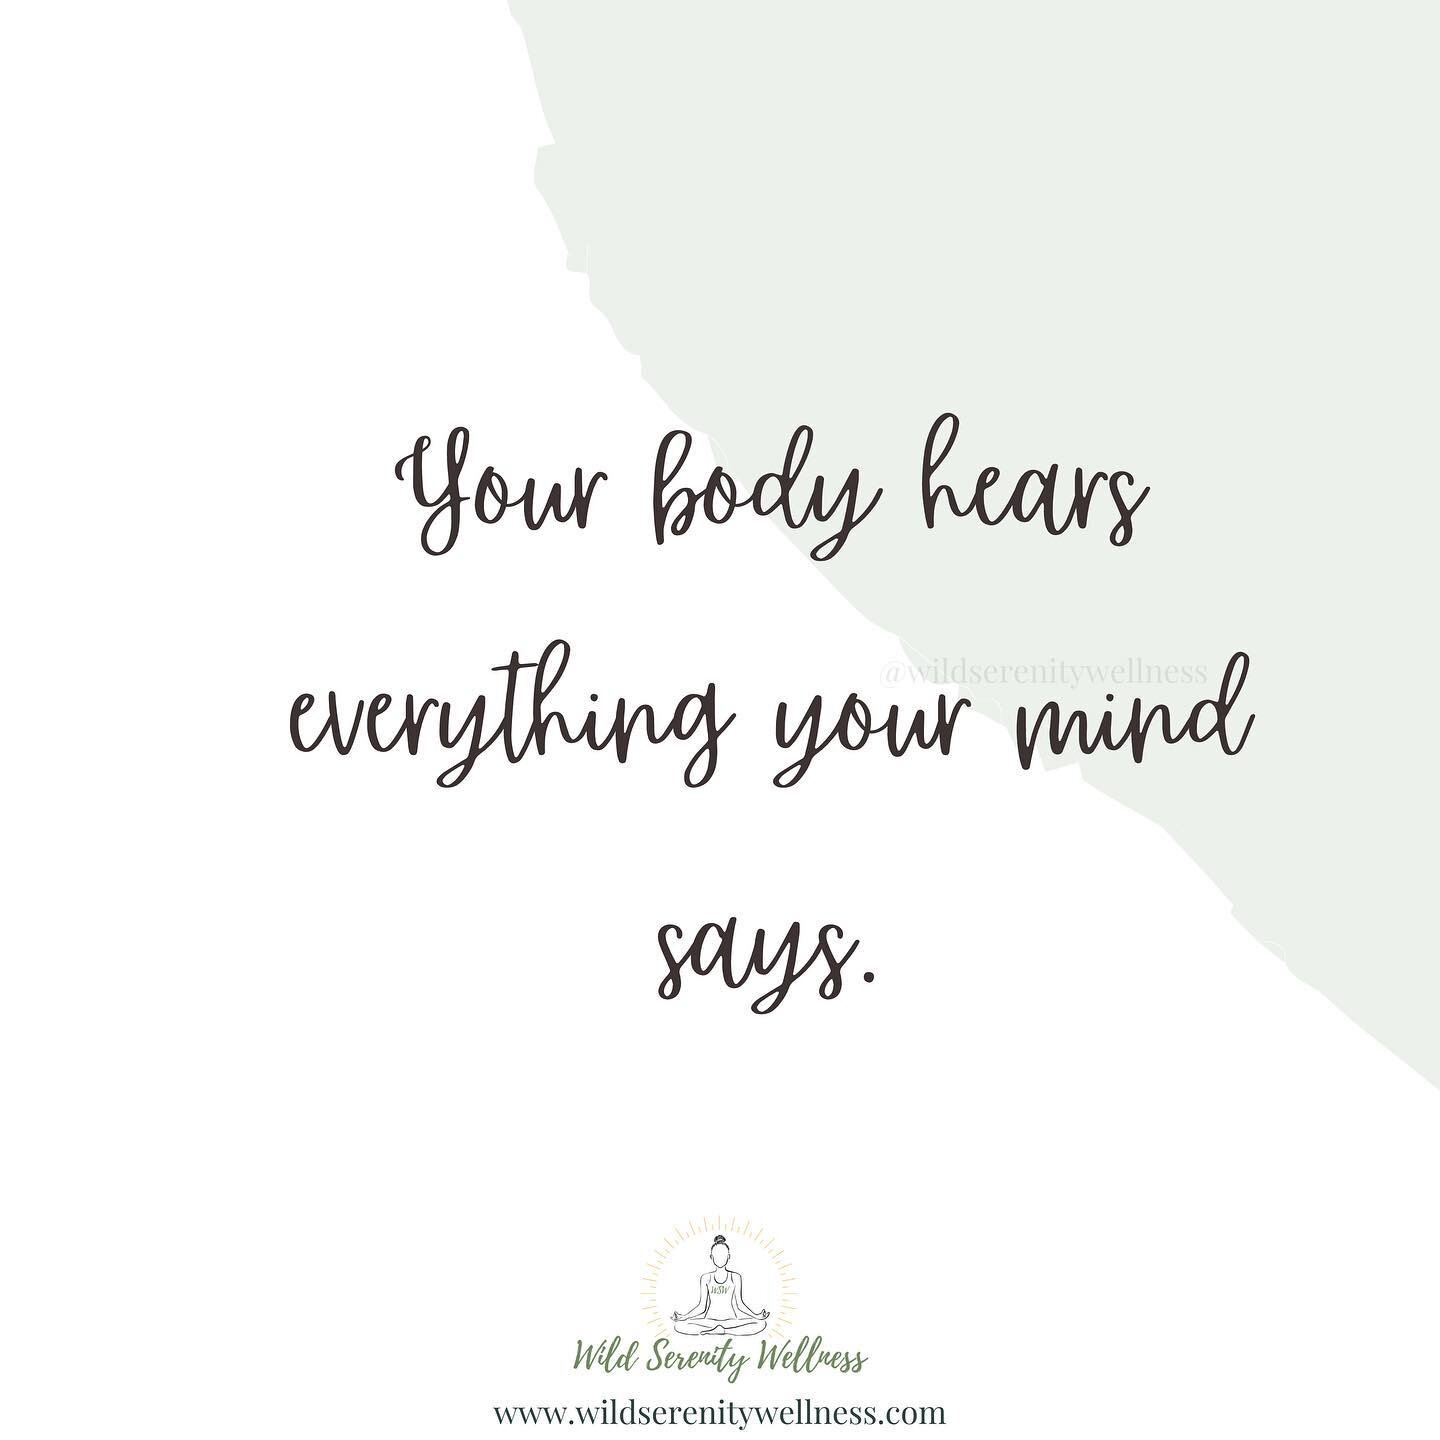 ✨✨ Be your best friend and talk to yourself with love, compassion and kindness ✨✨
&bull;
&bull;
&bull;
#mindyourwellness 
#onlineevent 
#wellness 
#wellnesscoach 
#wellnesscenter
#wellnessclasses
#wildserenitywellness 
#wsw 
#yoga 
#meditation 
#onli